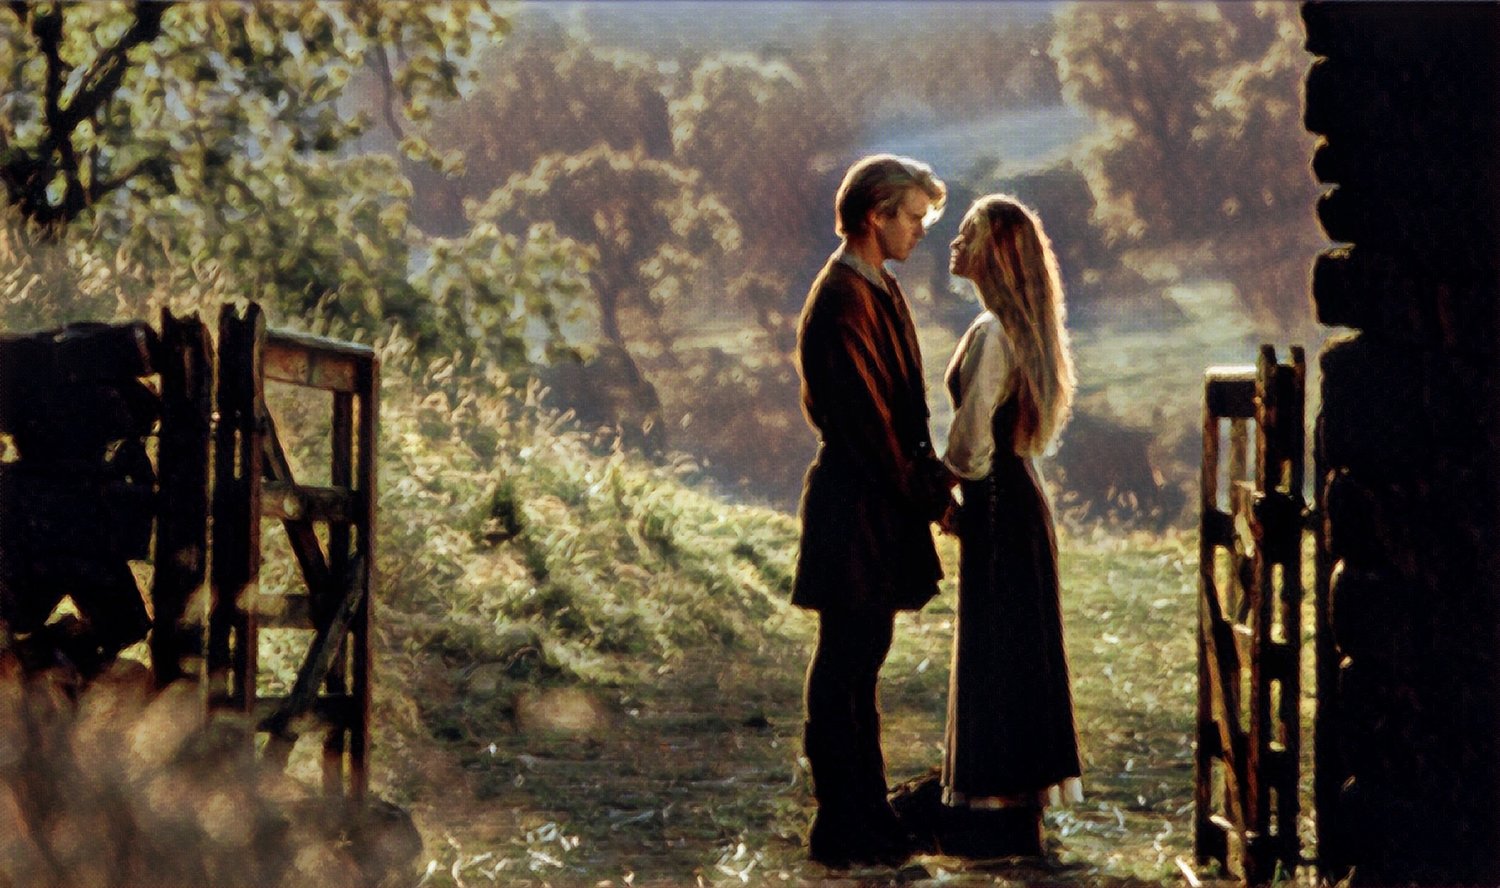 The Princess Bride, minutes 46 to 48